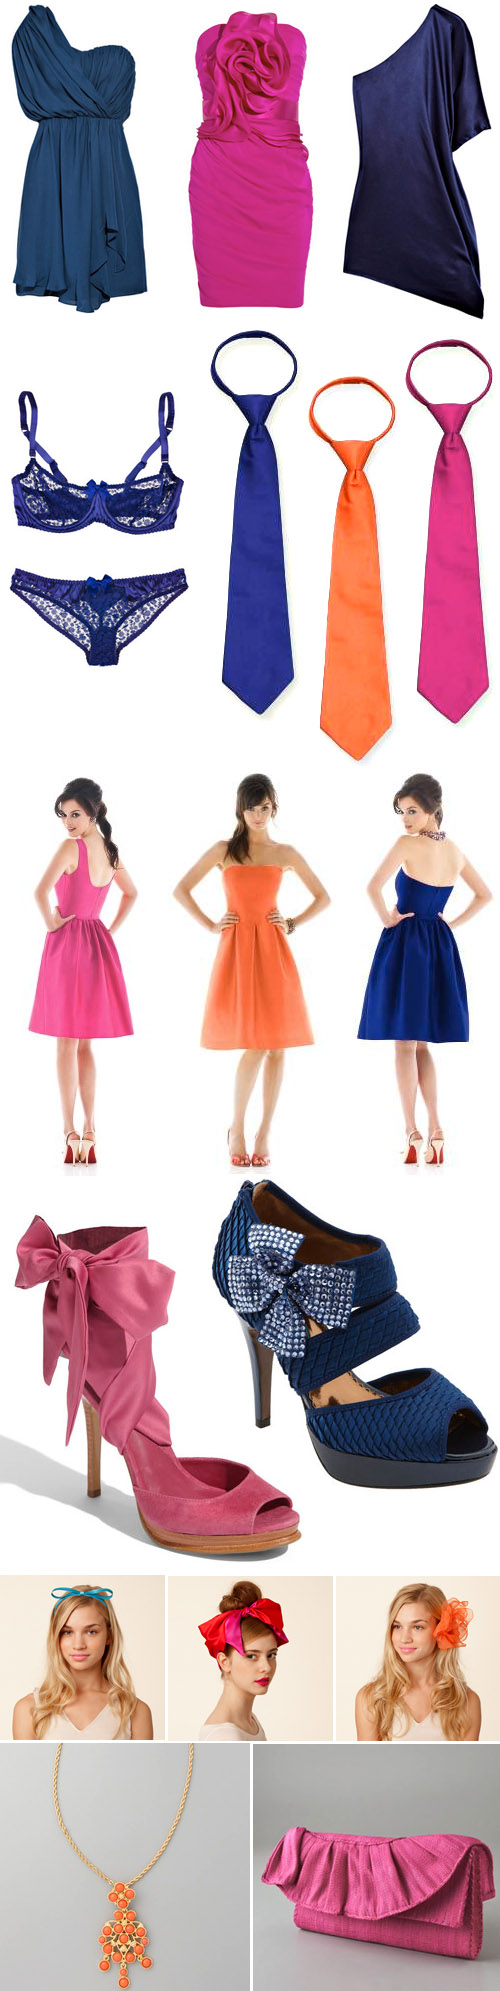 Blue, Orange and Pink Wedding Fashion and Accessories